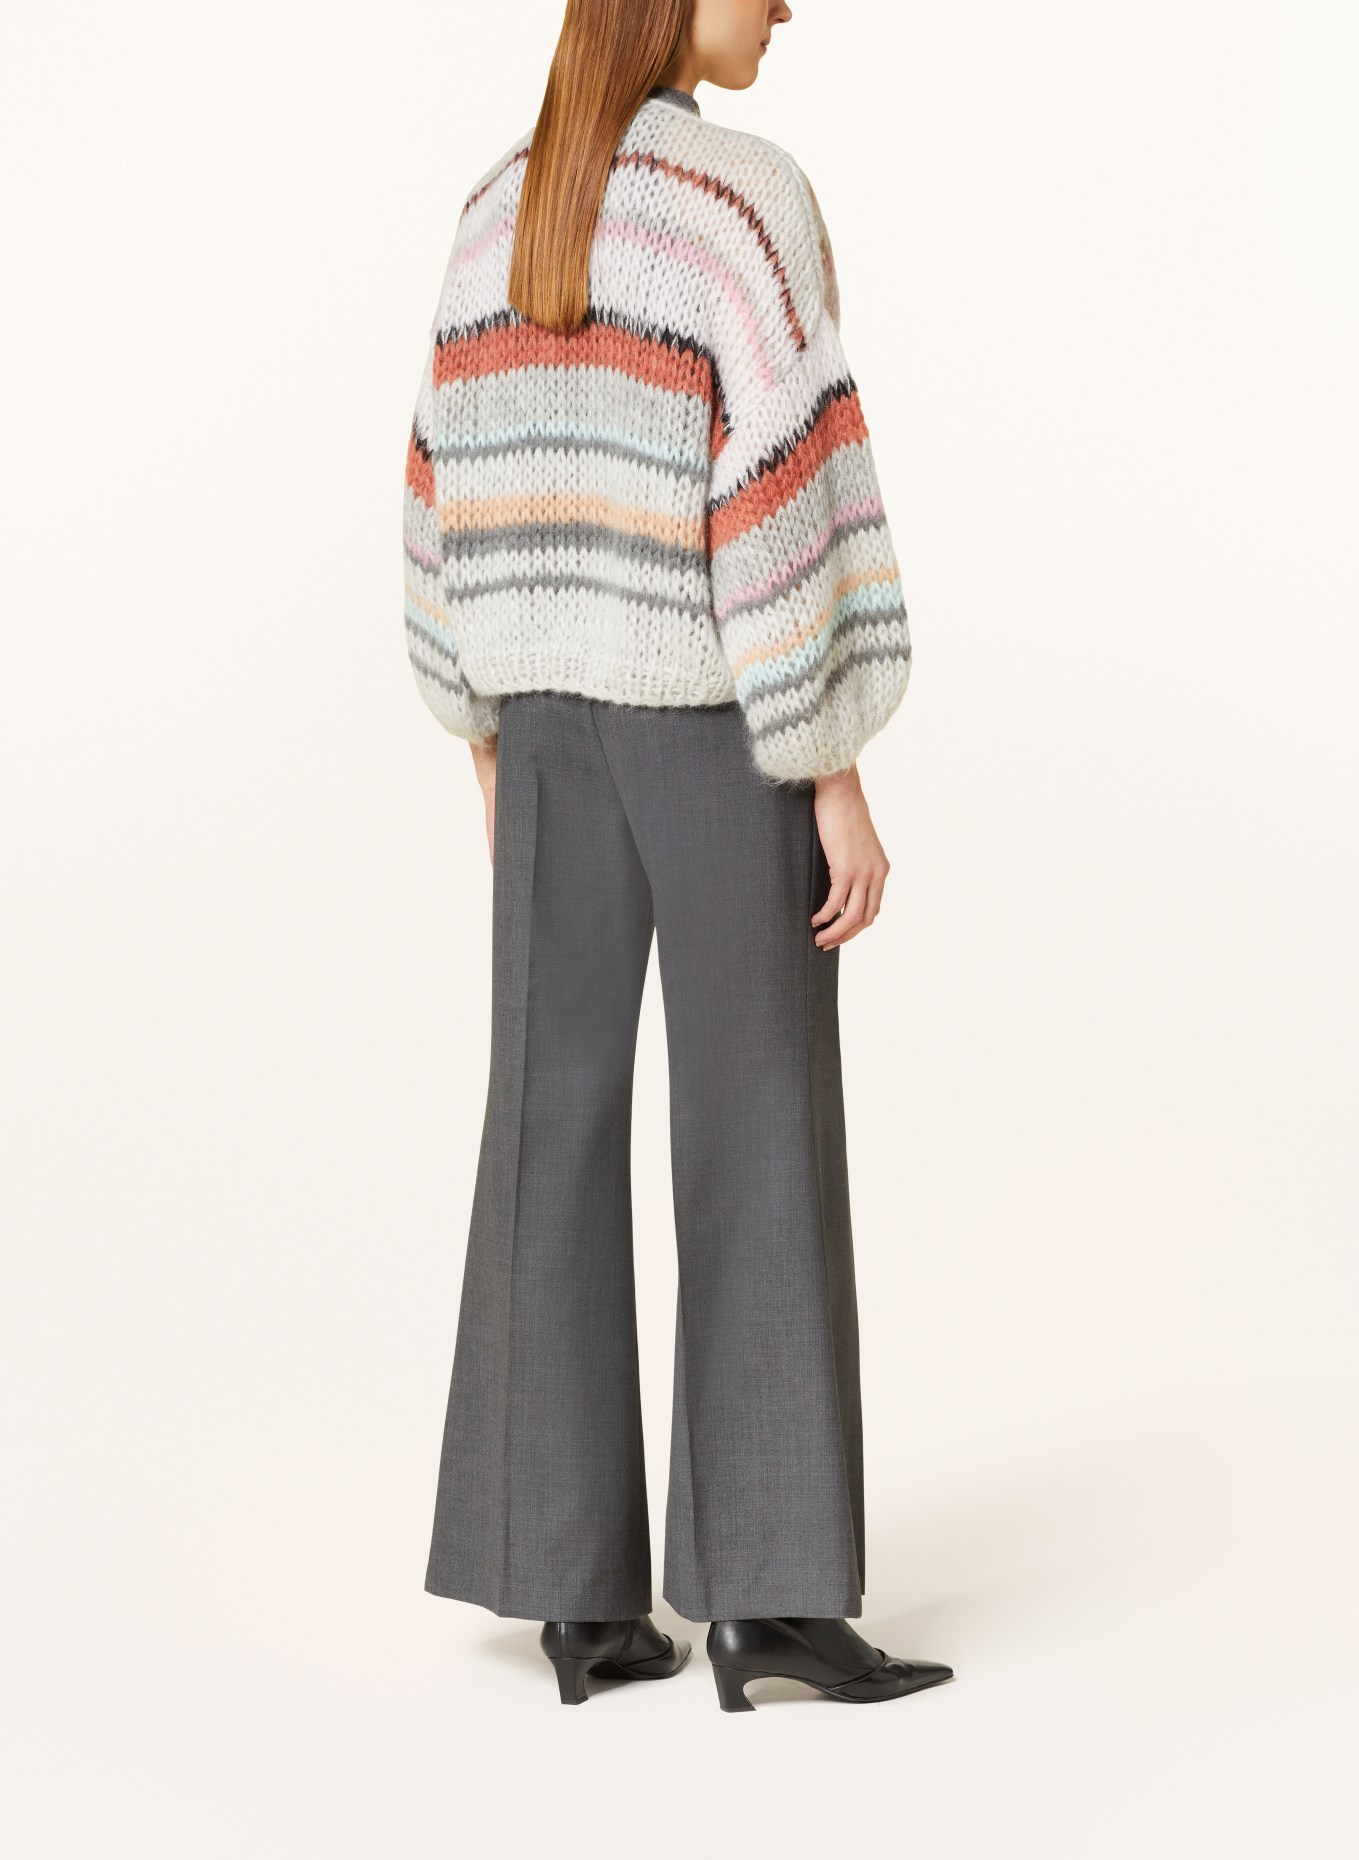 MAIAMI Oversized knit cardigan with mohair, Color: GRAY/ LIGHT PINK/ BROWN (Image 3)